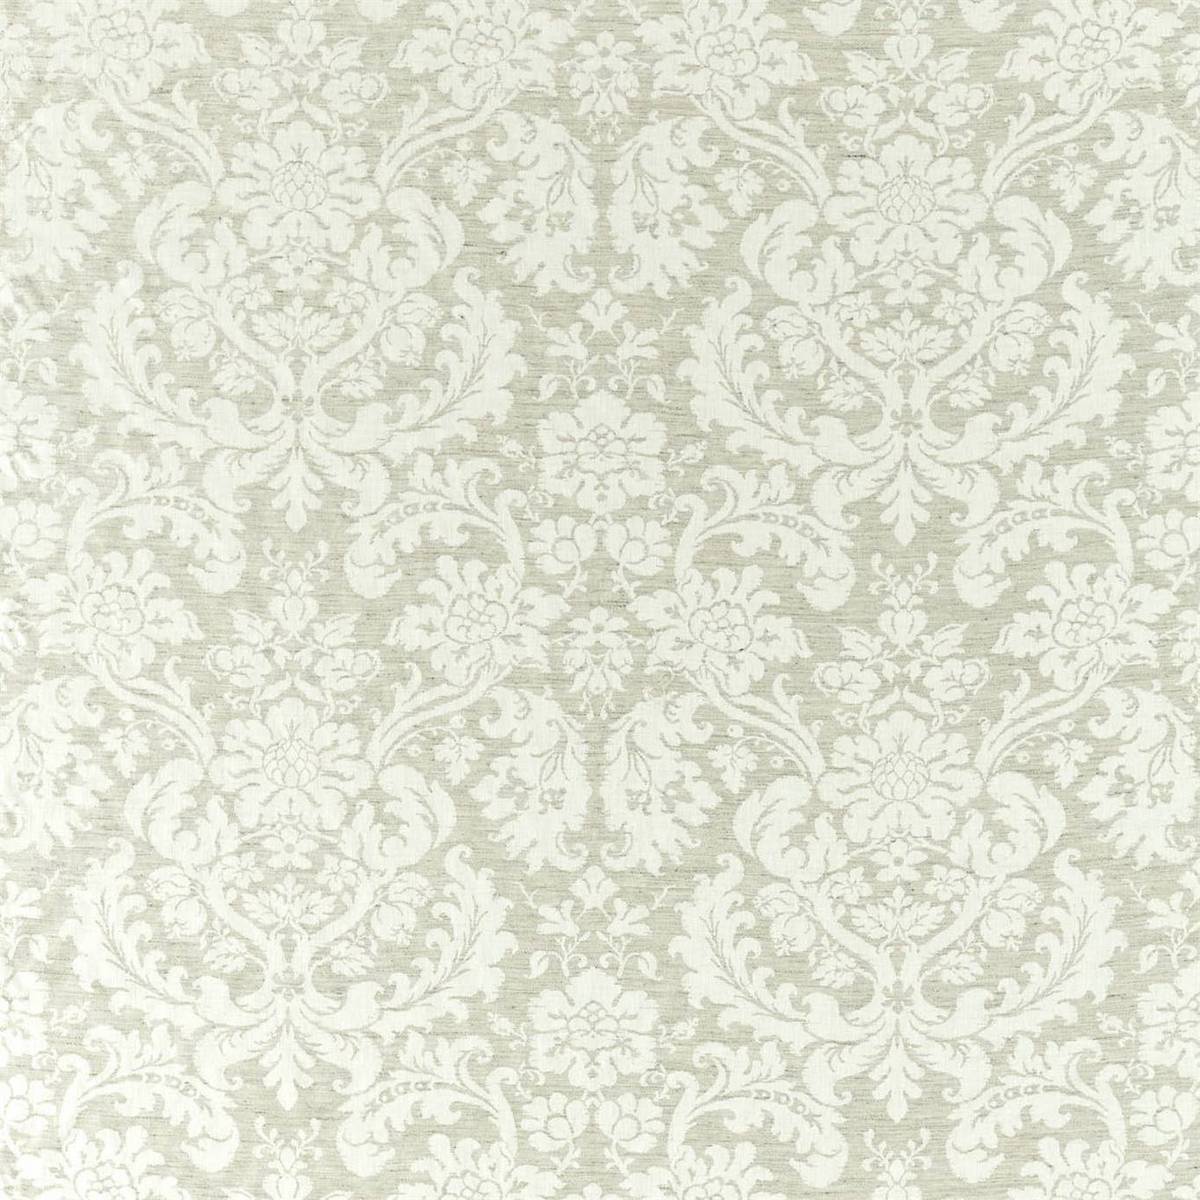 Tours Weave Platinum White Fabric by Zoffany